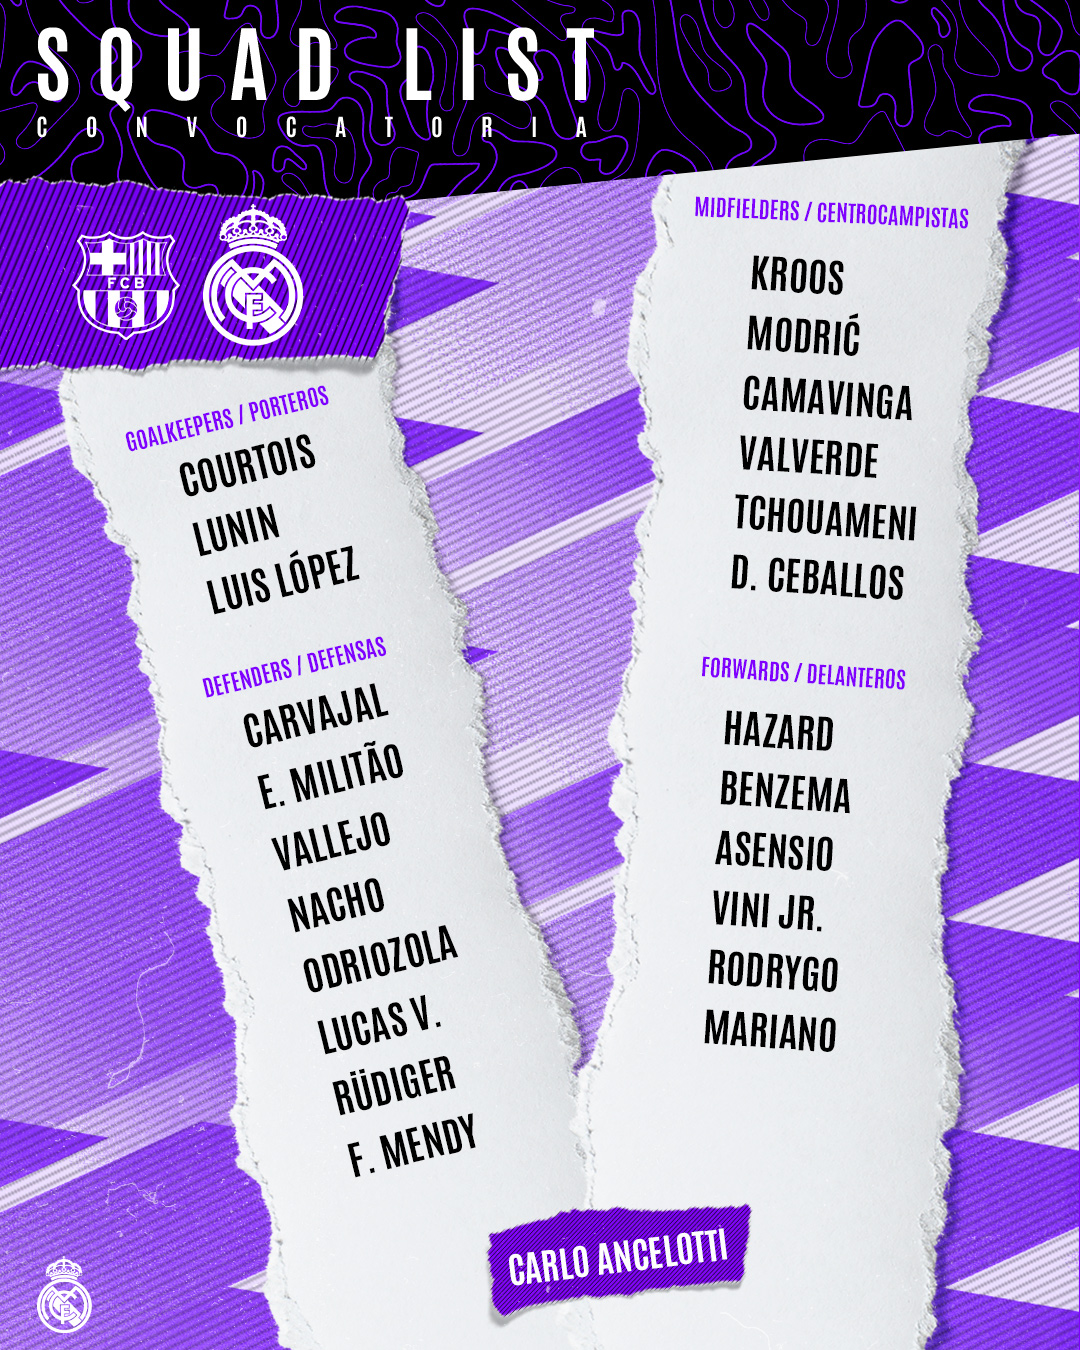 Combocados de Real Madrid for a duel with Barcelona.